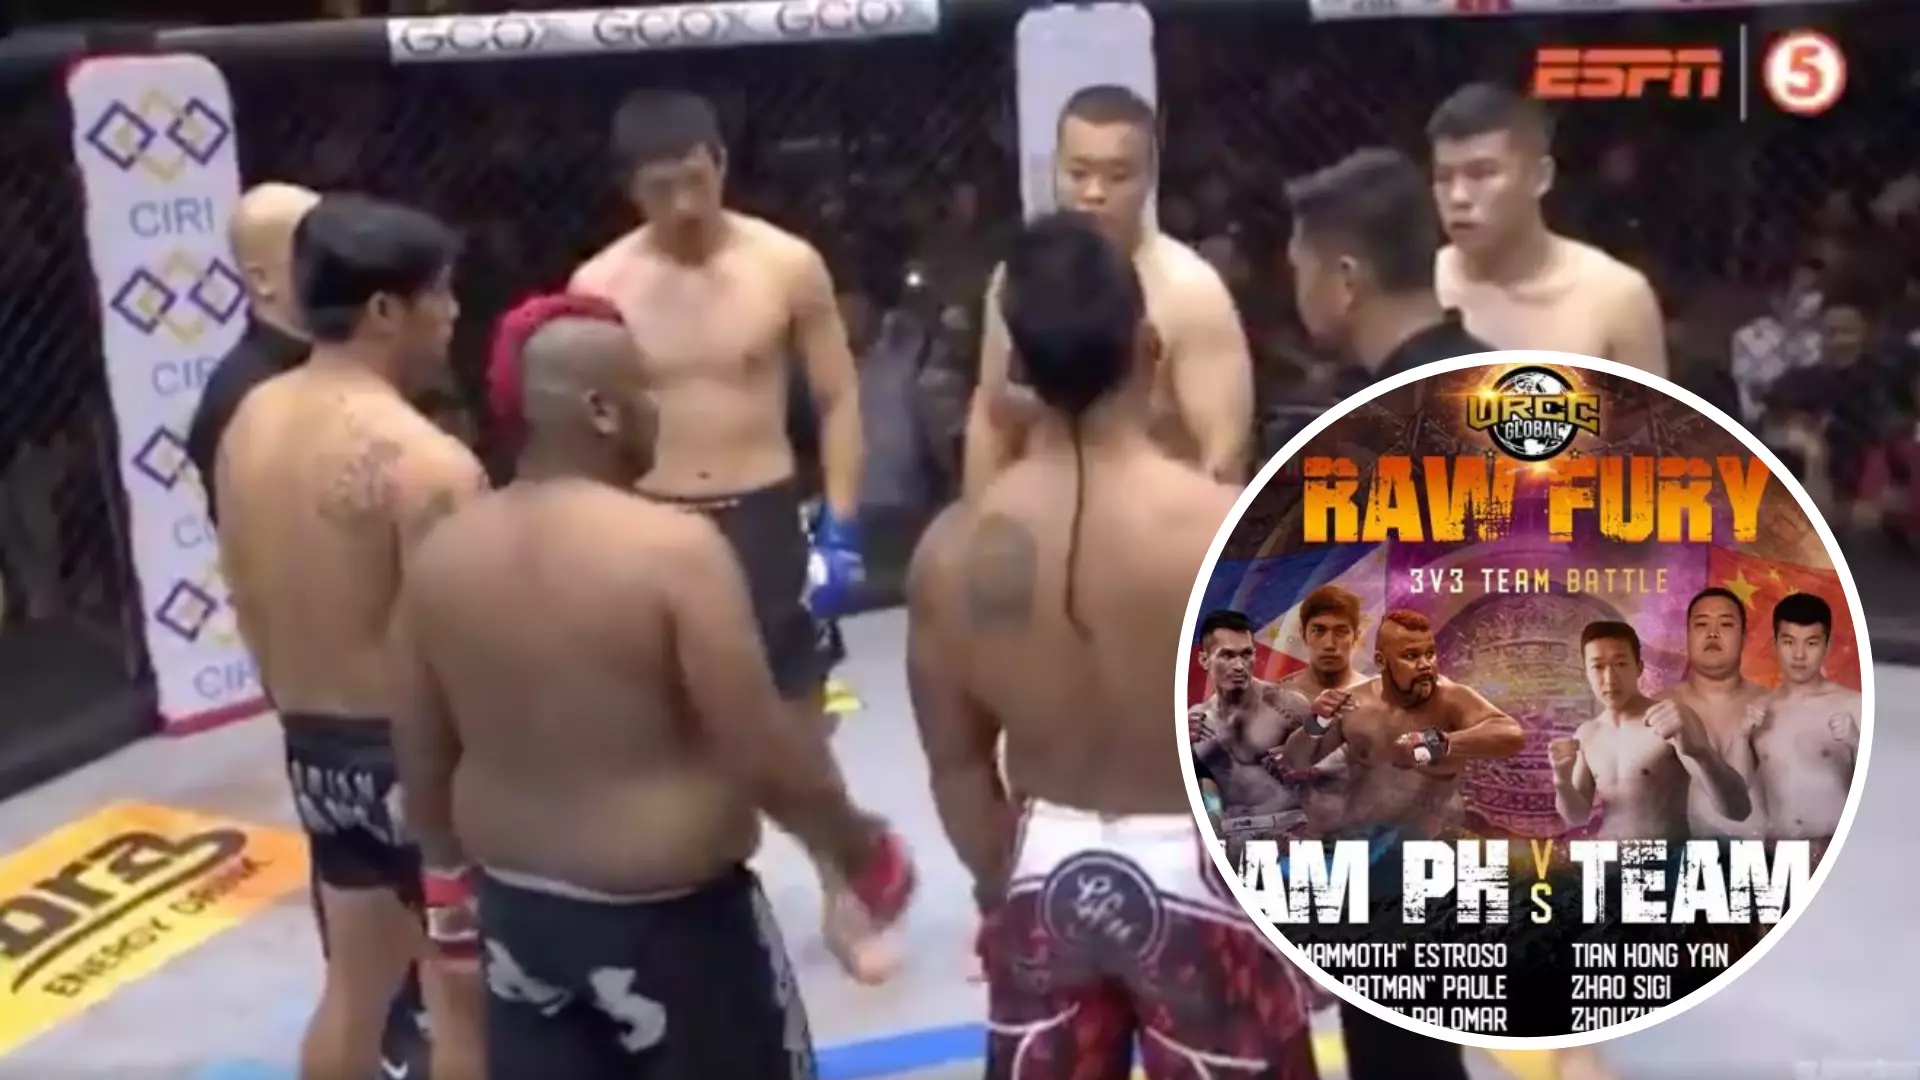 Team Philippines Vs Team China In A 3-Vs-3 MMA Fight Is Absolute Chaos